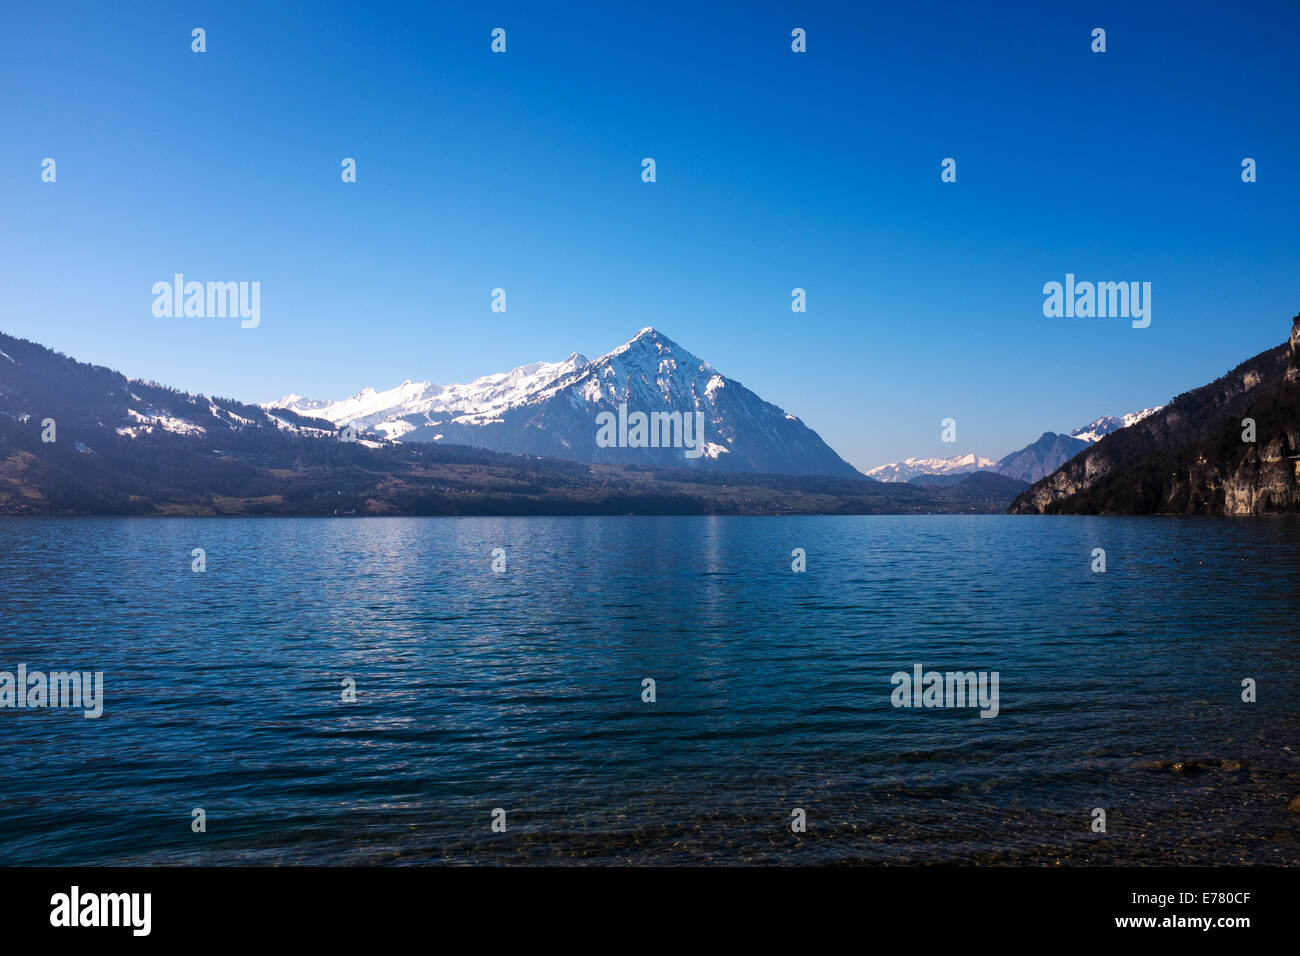 Thunersee with Niesen mountain in the background, Switzerland Stock Photo